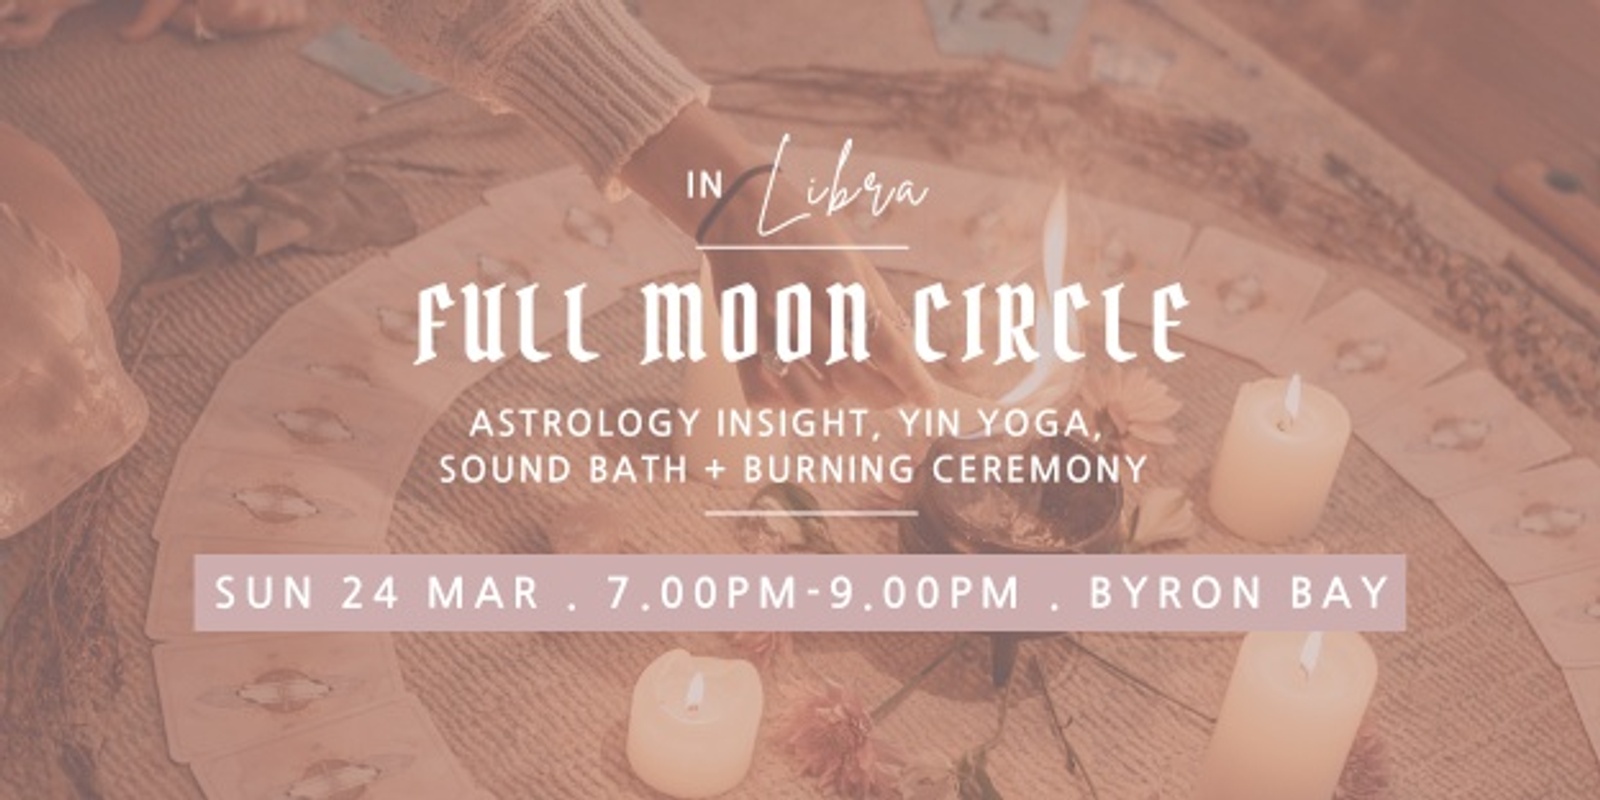 Banner image for Full Moon Circle in Libra